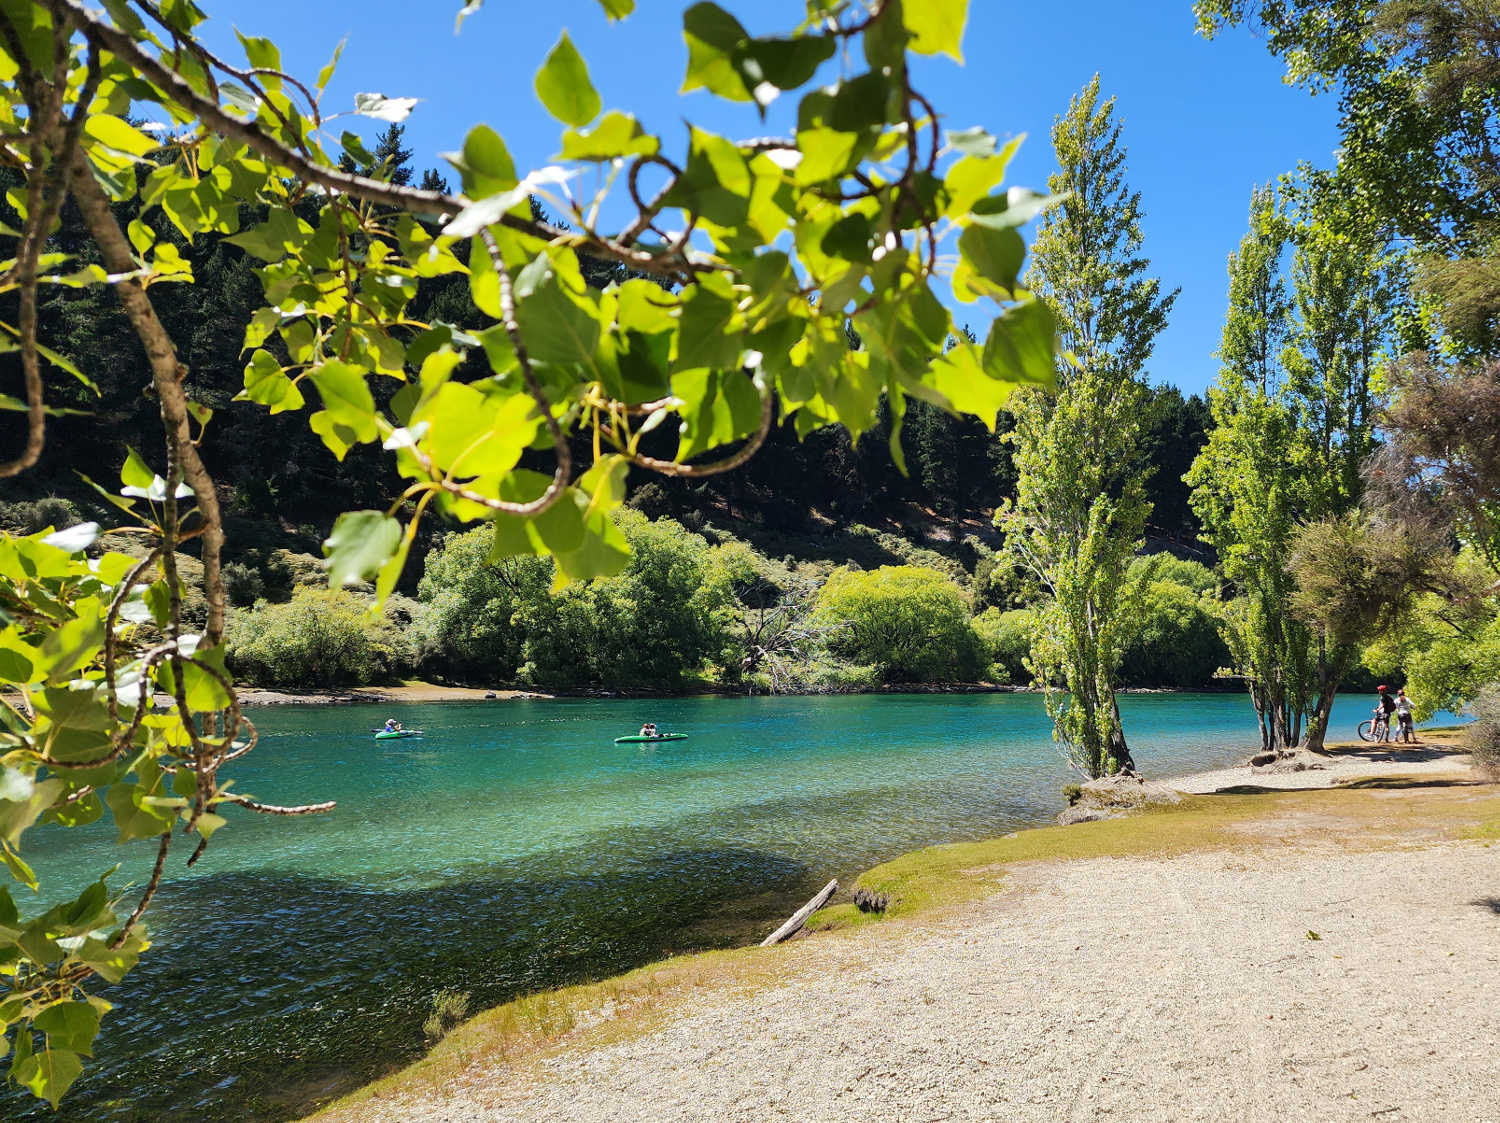 Upper Clutha River has it flows from Lake Wanaka, kayak, cycle or walk river trail, South Island, New Zealand